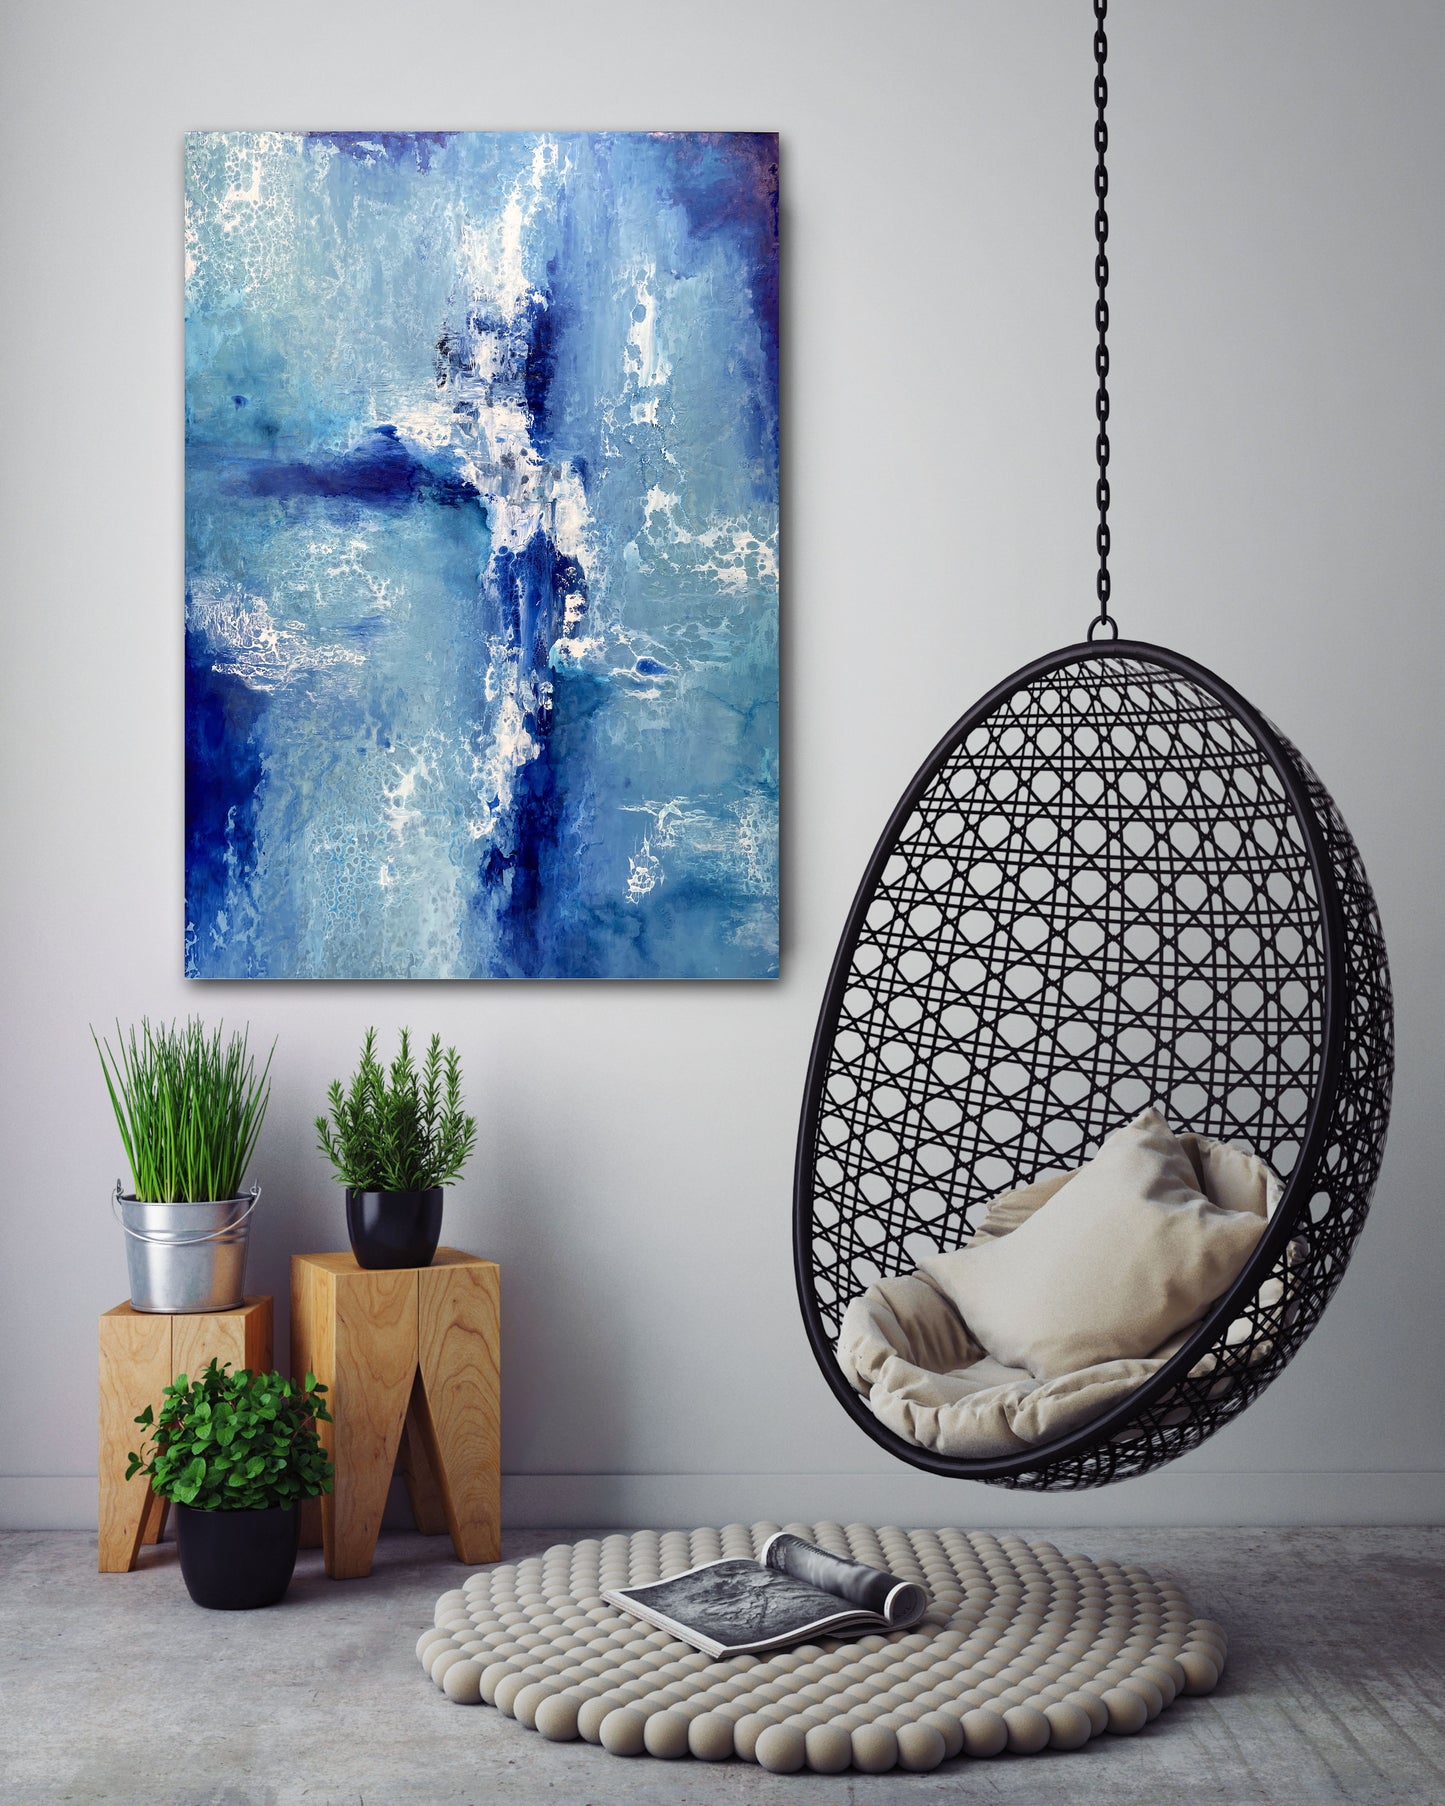 Blue Abstract Painting | Abstract Painting | E. Wildman Gallery